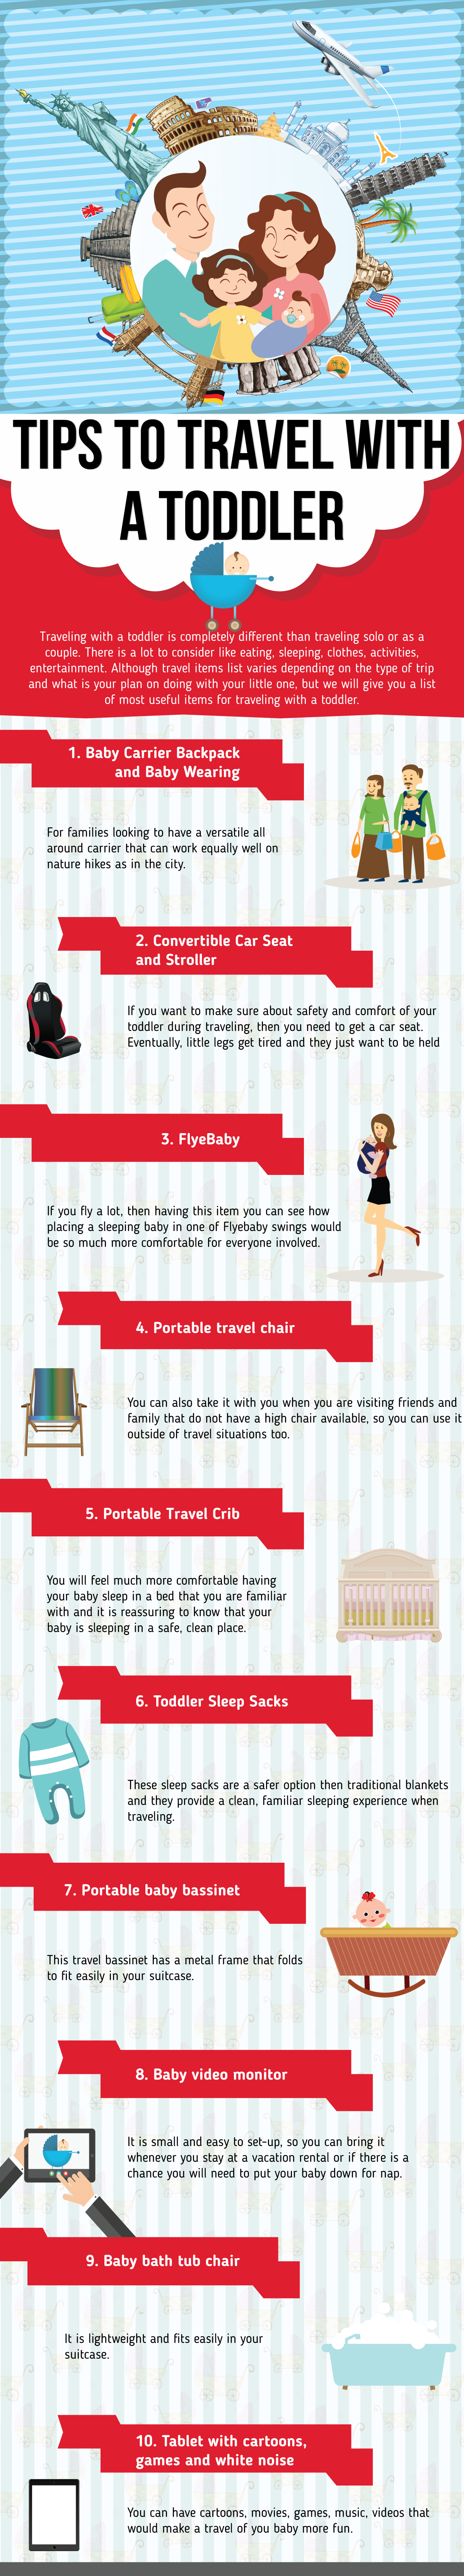 Top Ten Tips to Travel with a Toddler